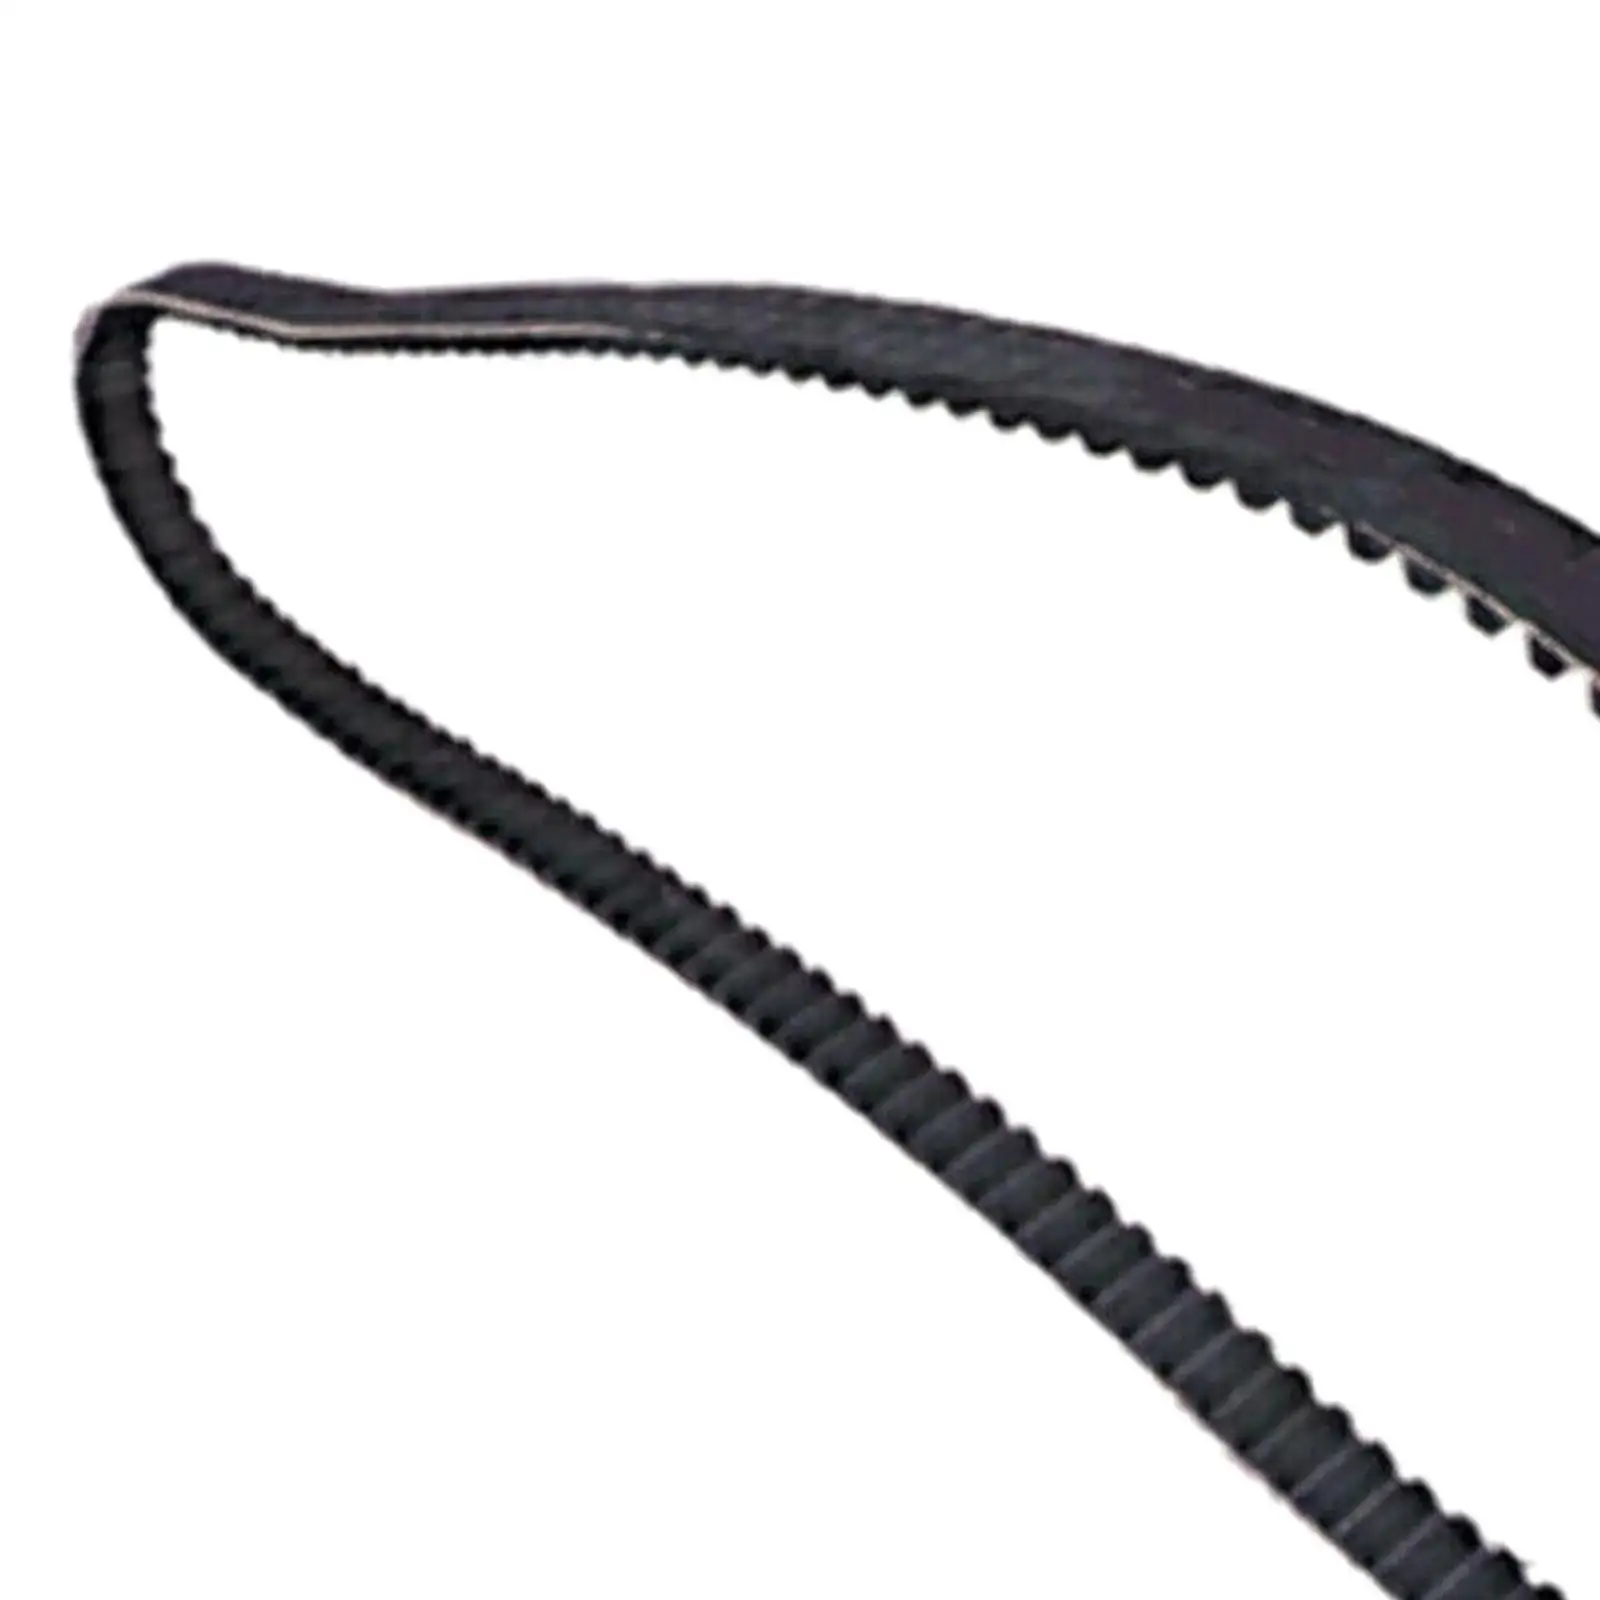 Rear Drive Belt 58-433 Motorcycle Accessories for Dyna Fxdxi Fxdwg